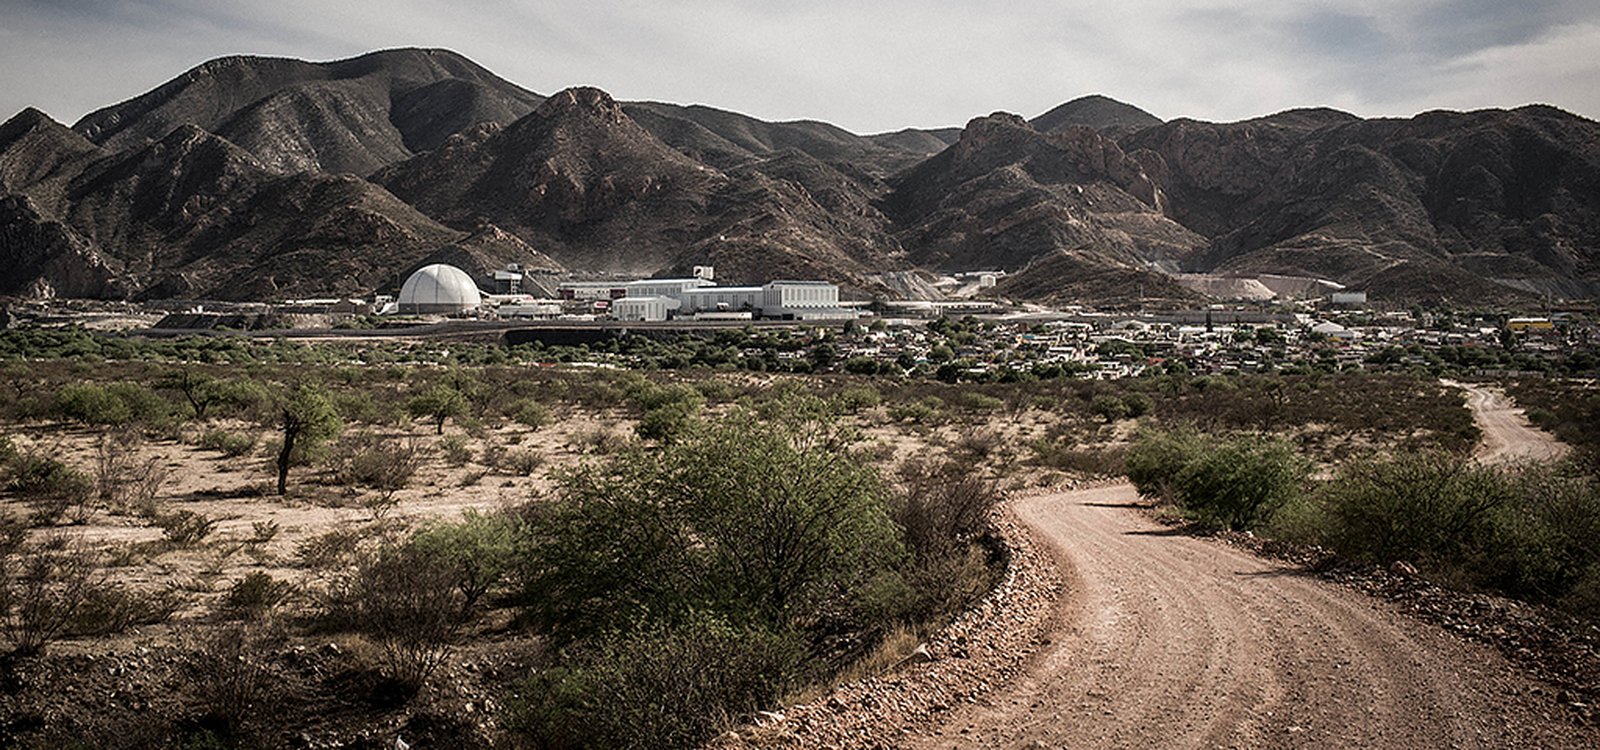 The Velardeña mine run by Industrias Peñoles has implemented cutting-edge technologies to preserve the area’s water supply and reduce air pollution. 